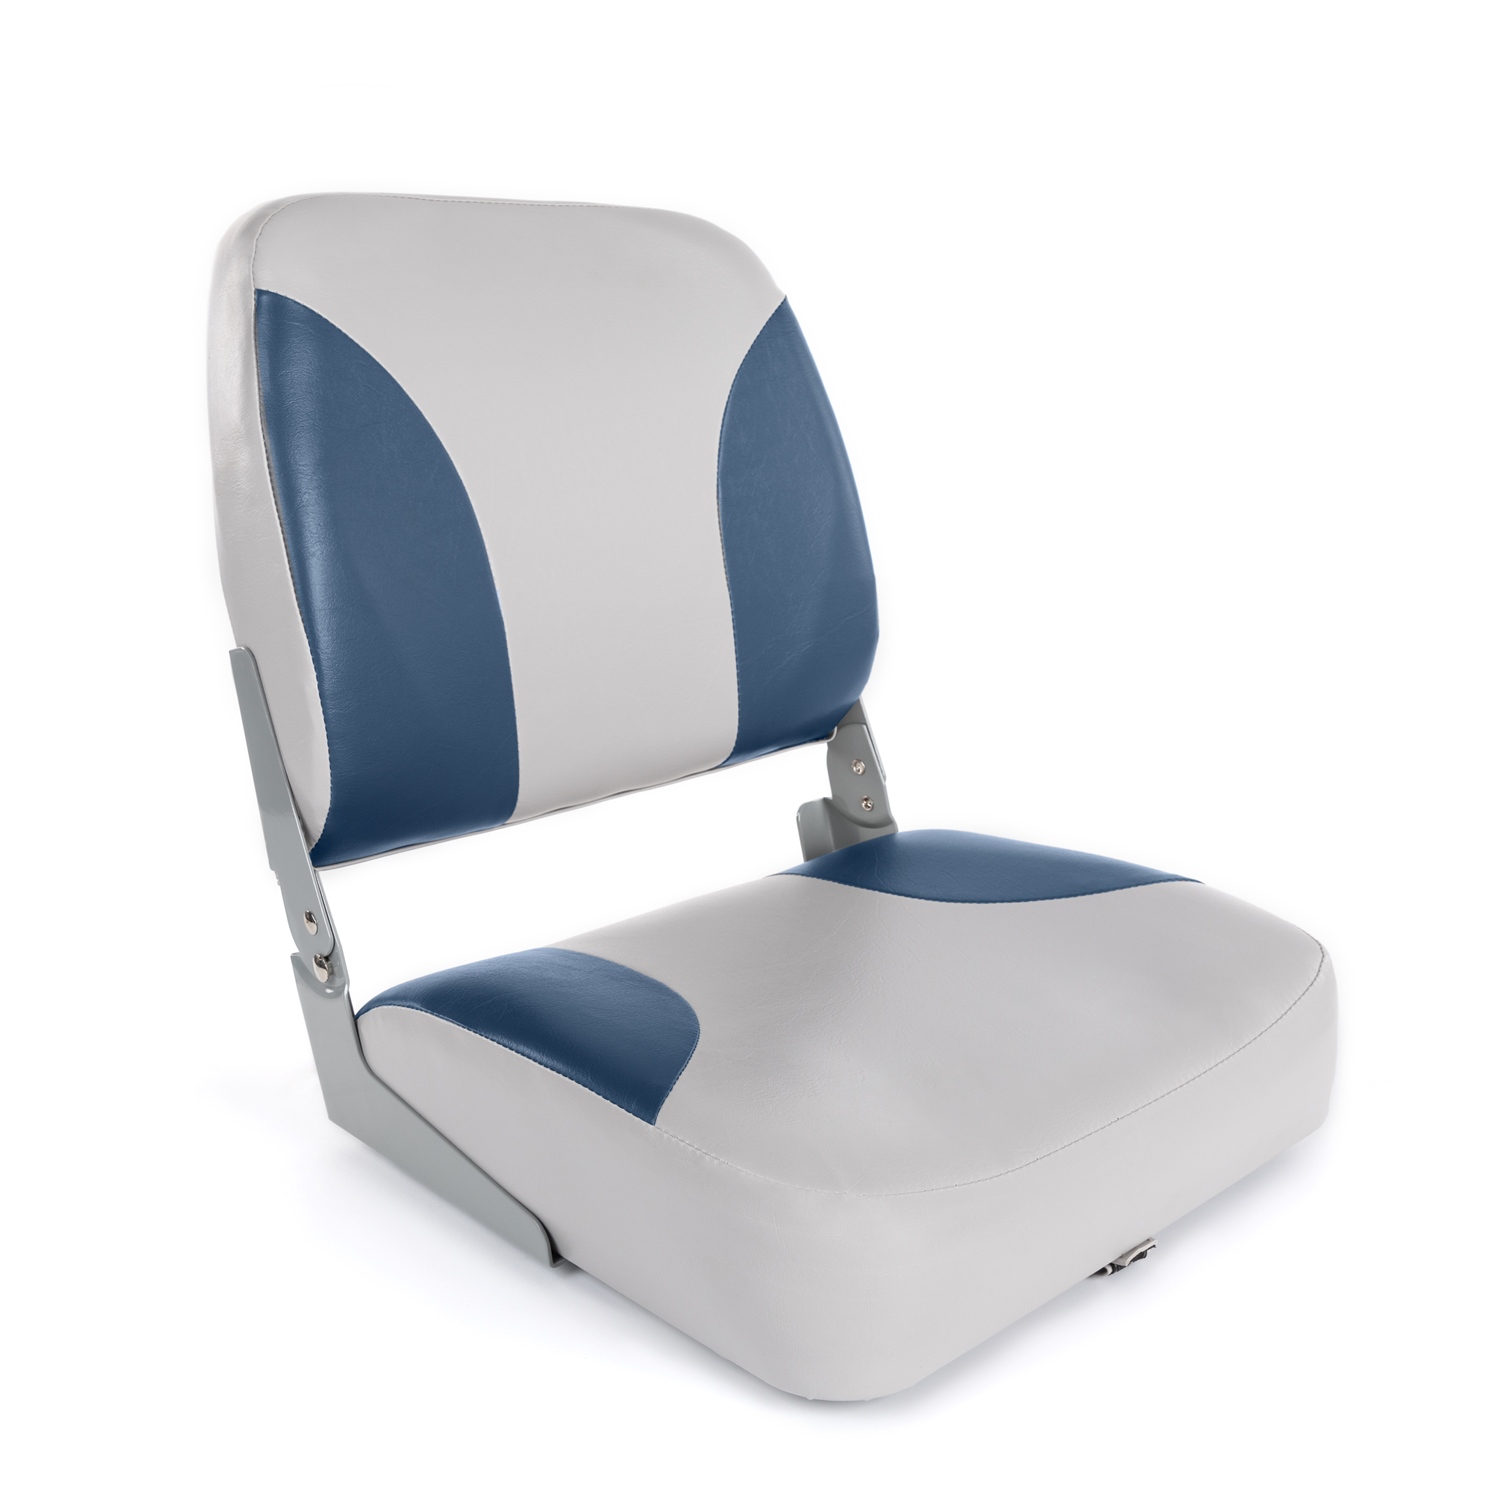 WISE Economy Fold-Down Boat Seat | Kimpex Canada